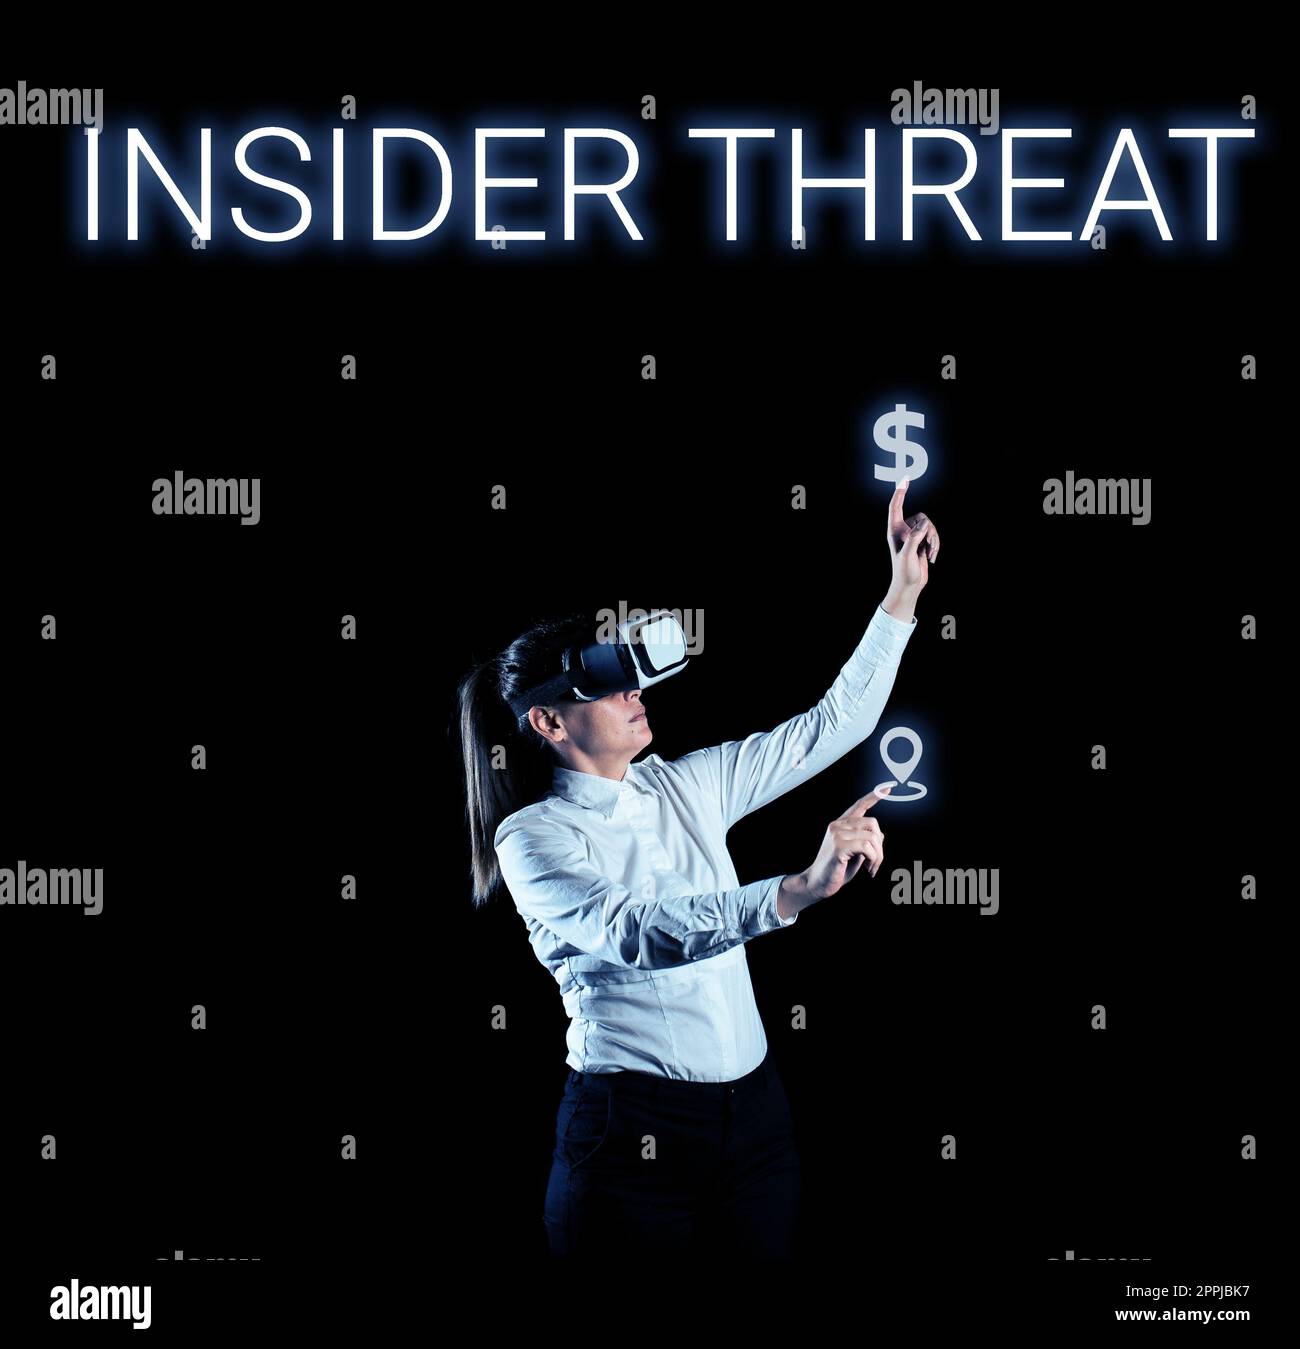 Text showing inspiration Insider Threat. Word Written on security threat that originates from within the organization Stock Photo